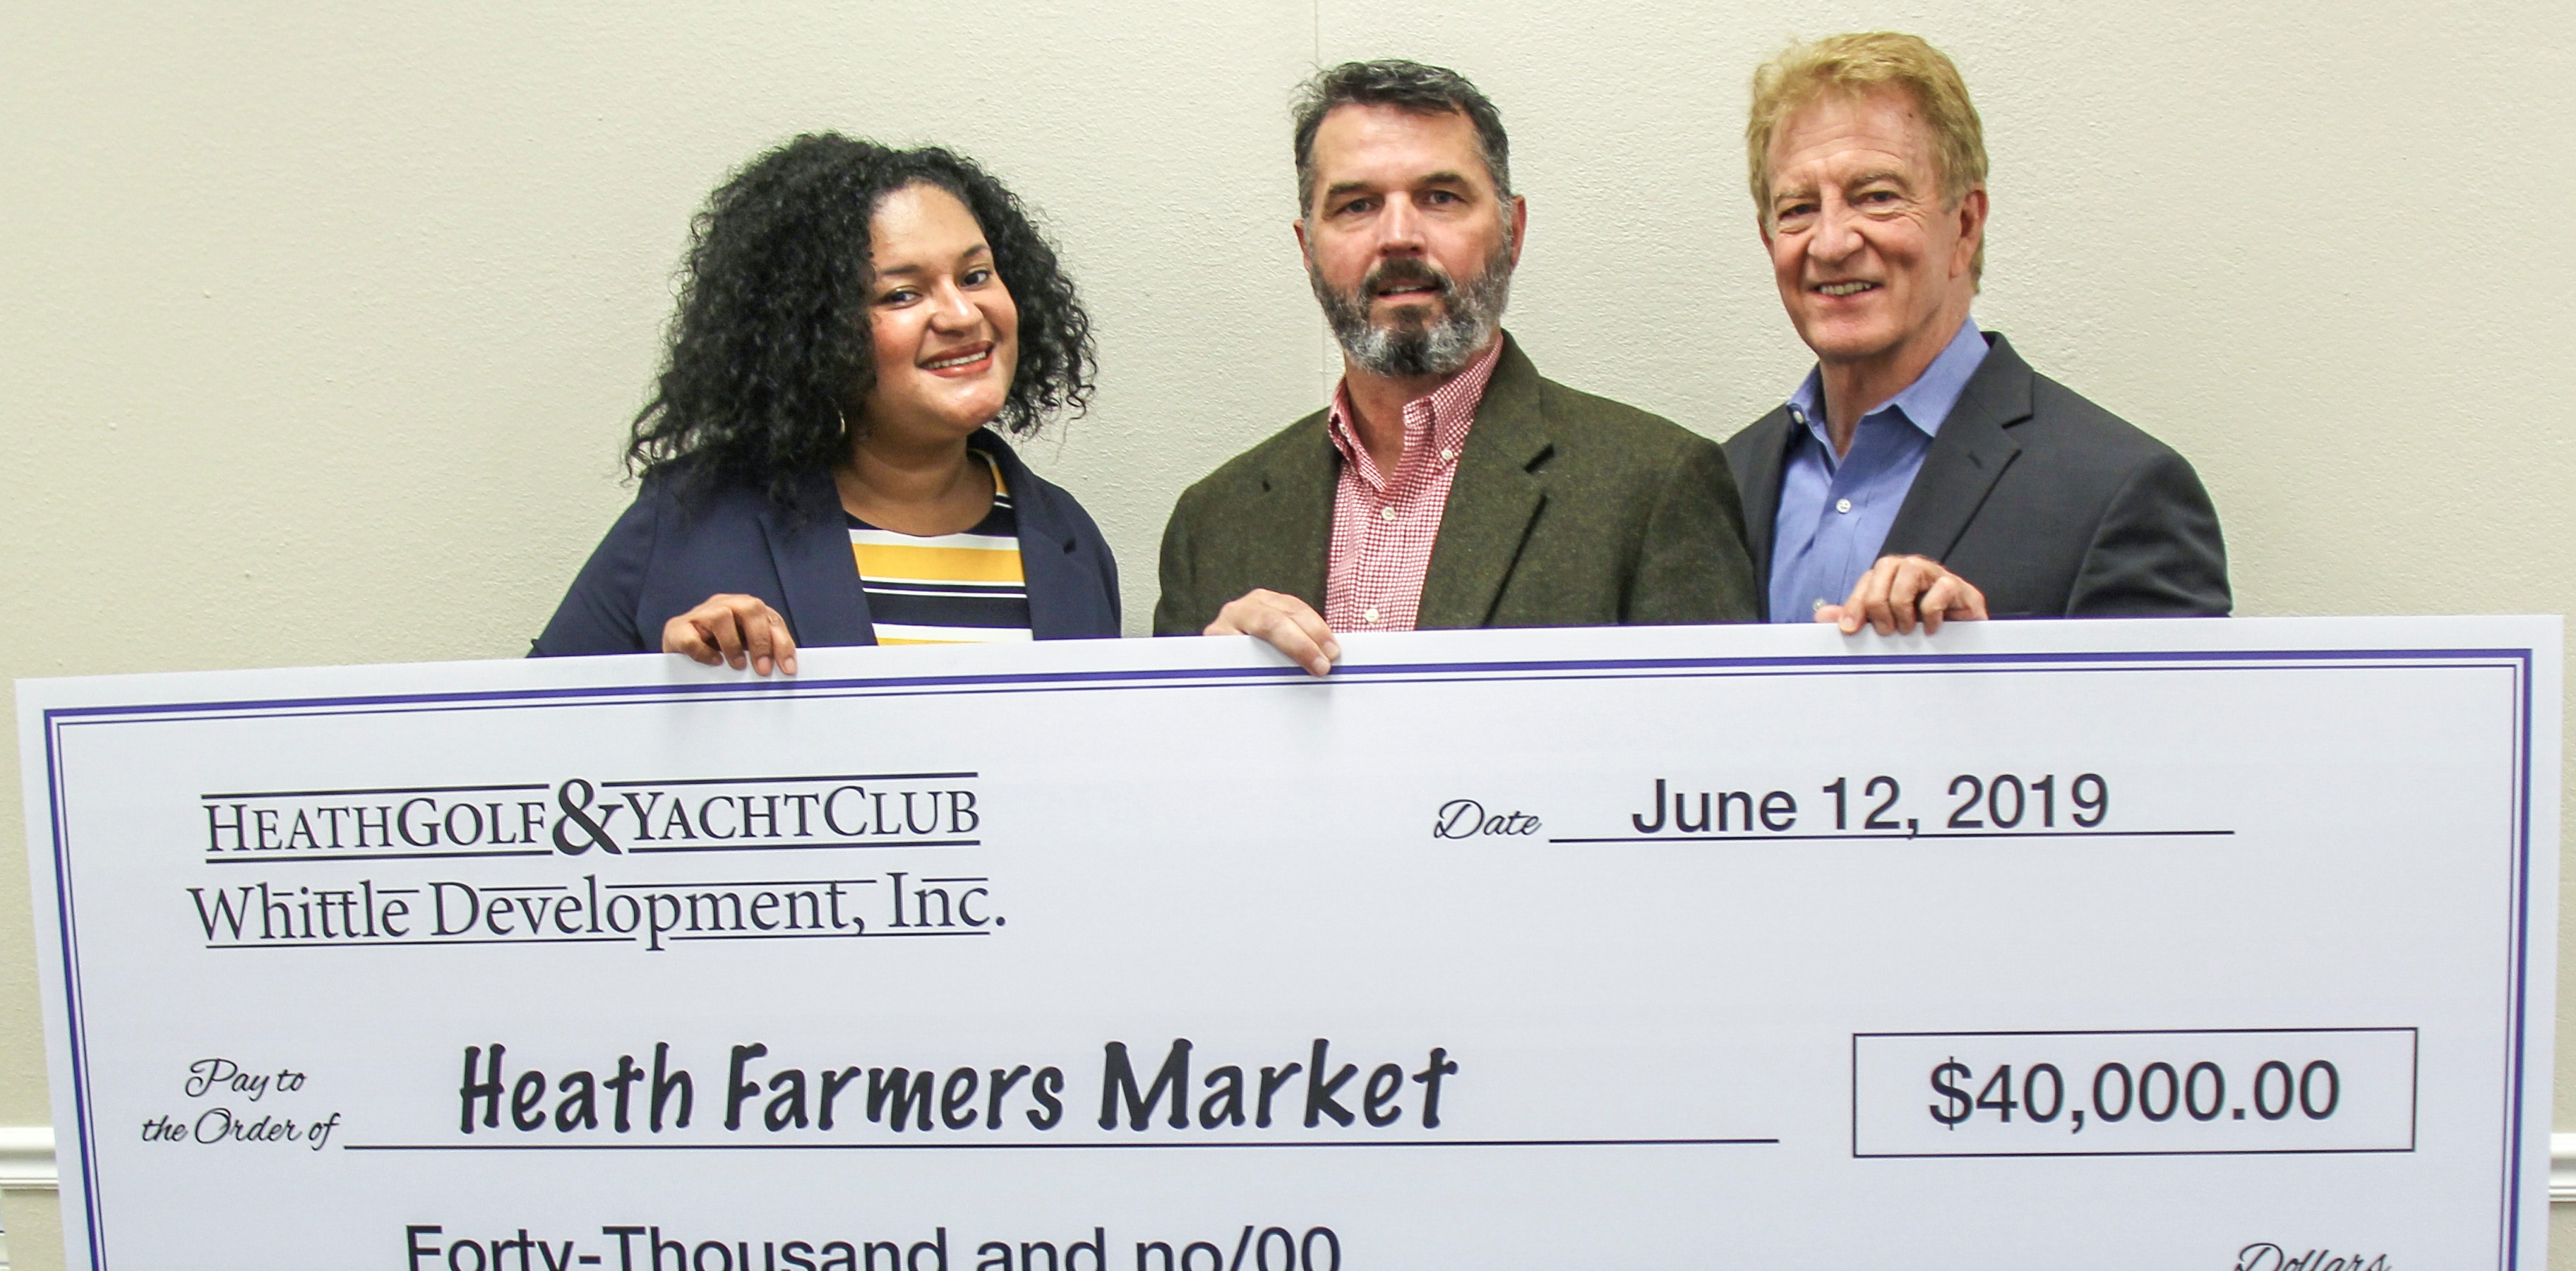 Heath Golf & Yacht Club and Whittle Development Company Accept Opportunity to be Exclusive Sponsor of New Heath Farmers Market